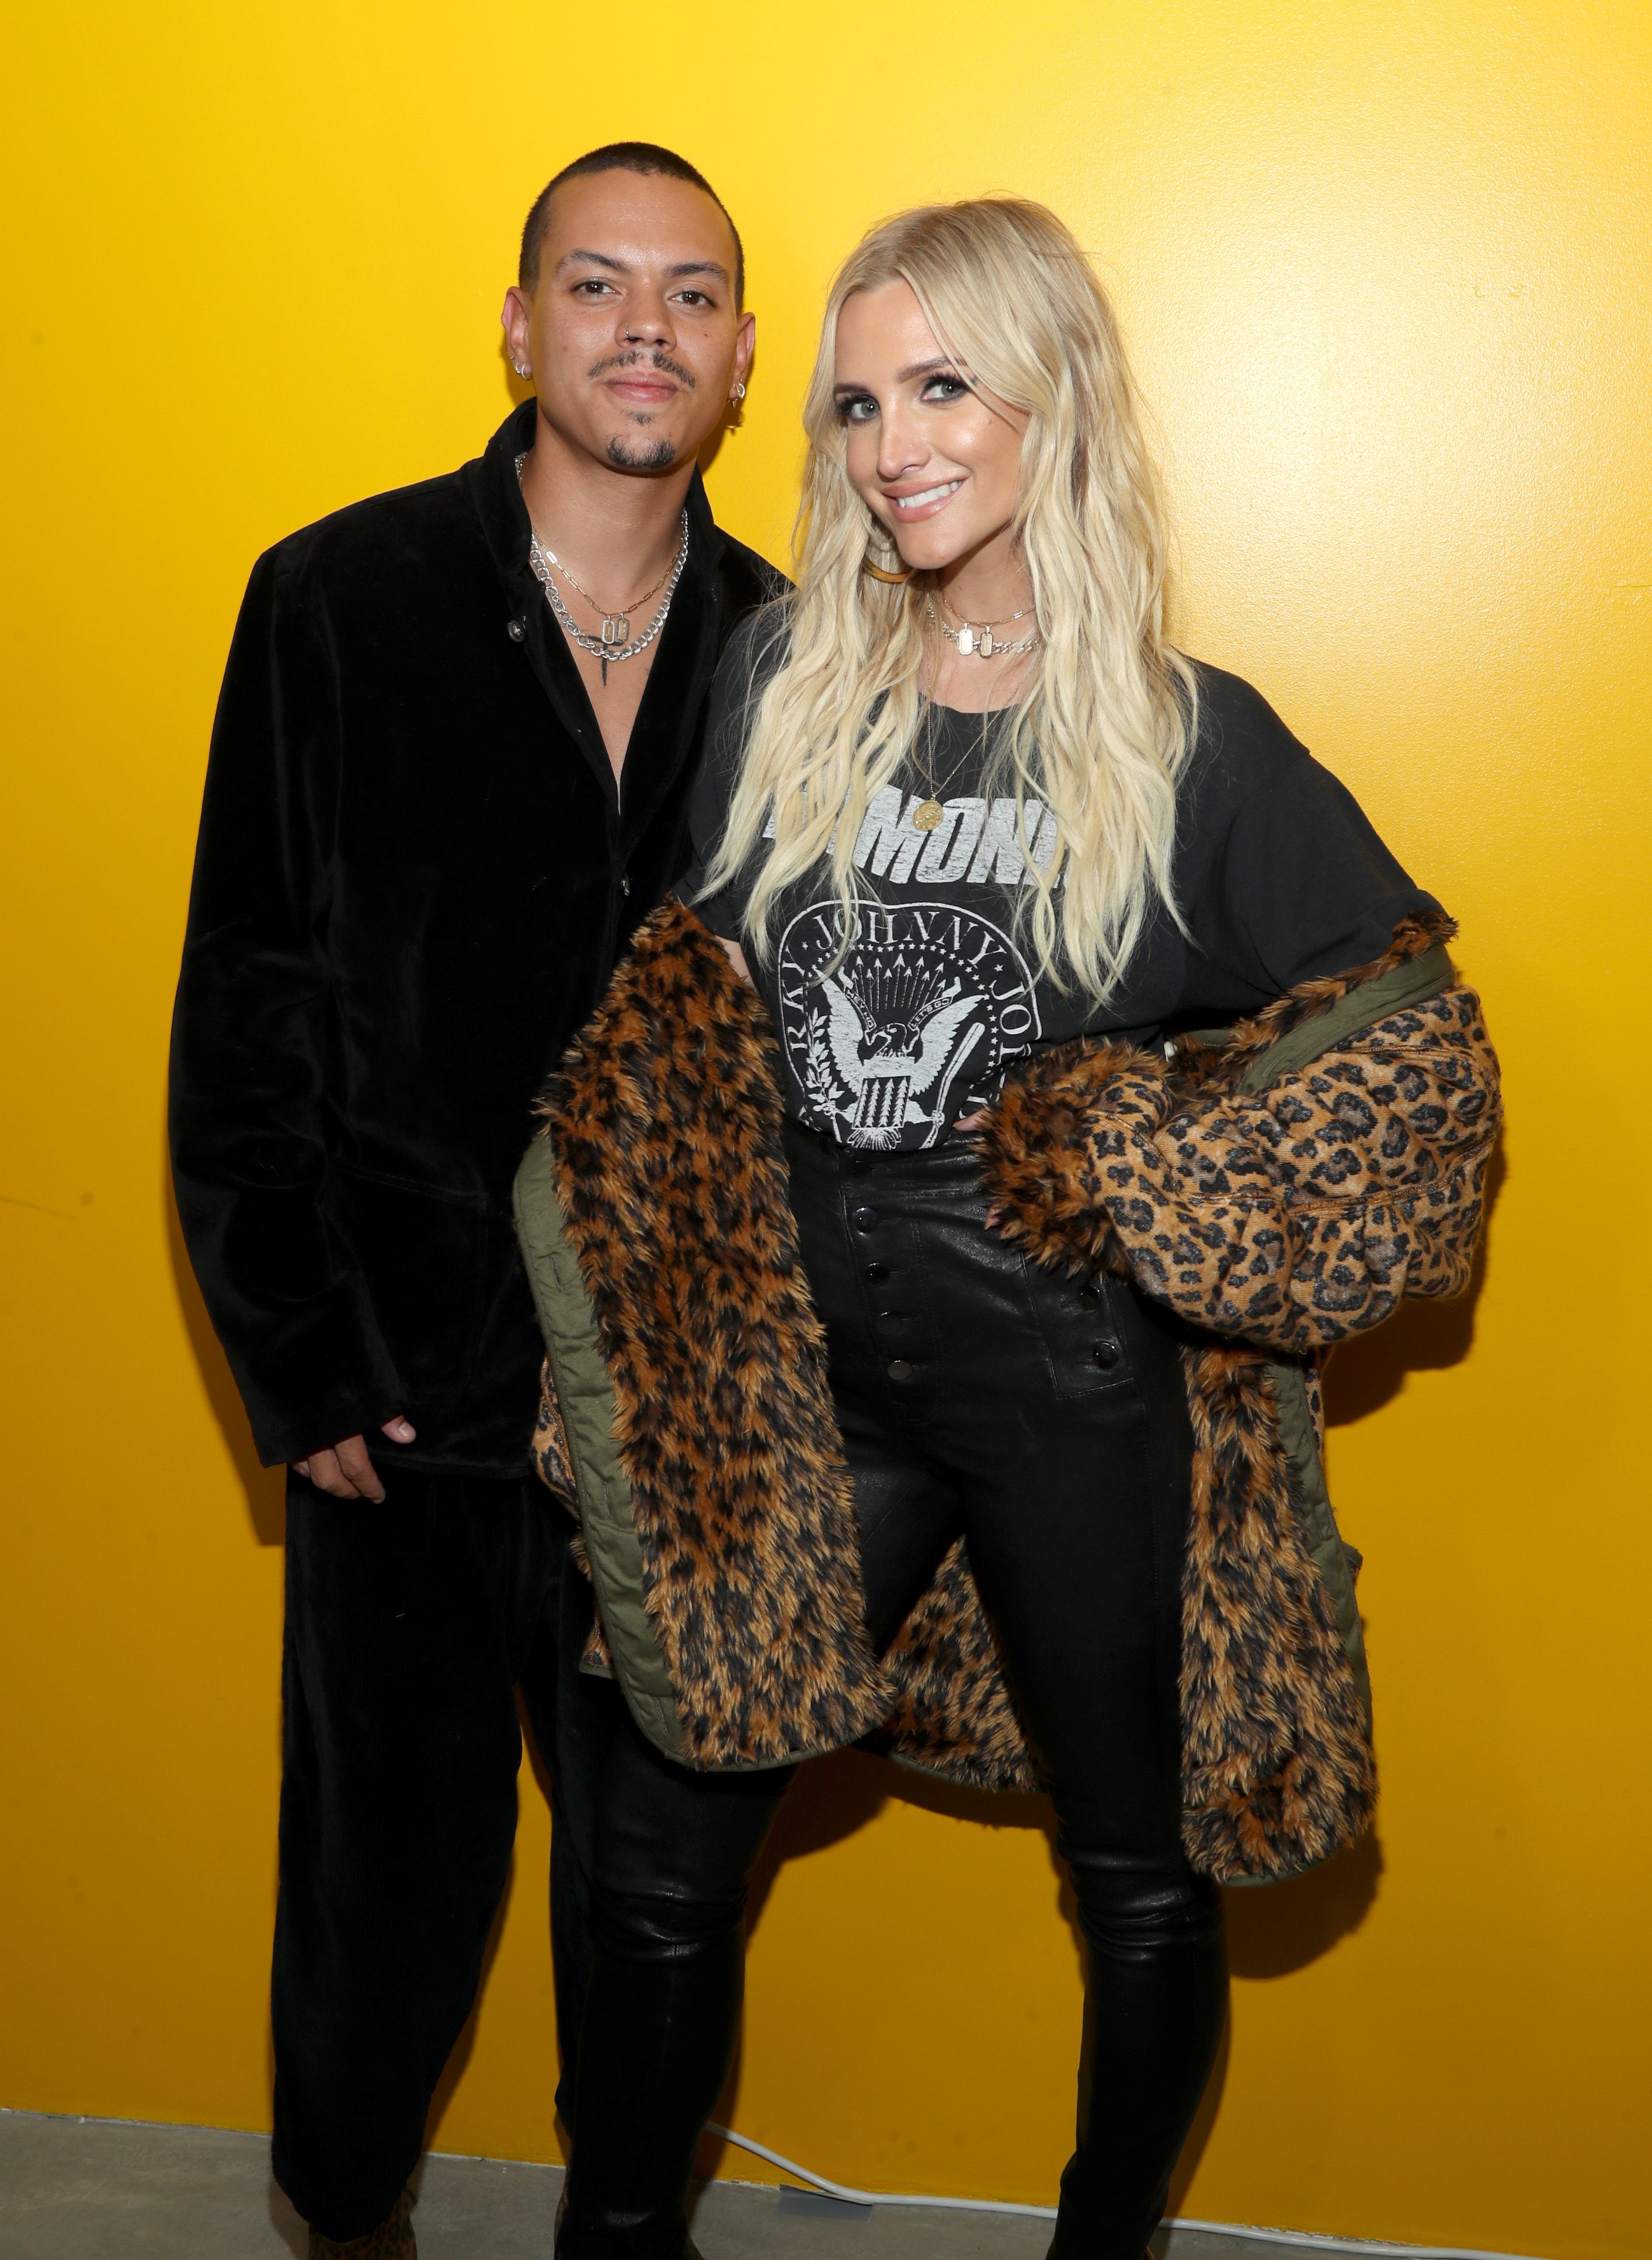 Ashlee Simpson and husband Evan Ross at Talent Resources Presents Airgraft's The Art Of Clean Vapor in Los Angeles, California | Photo: Jerritt Clark/Getty Images for Airgraft